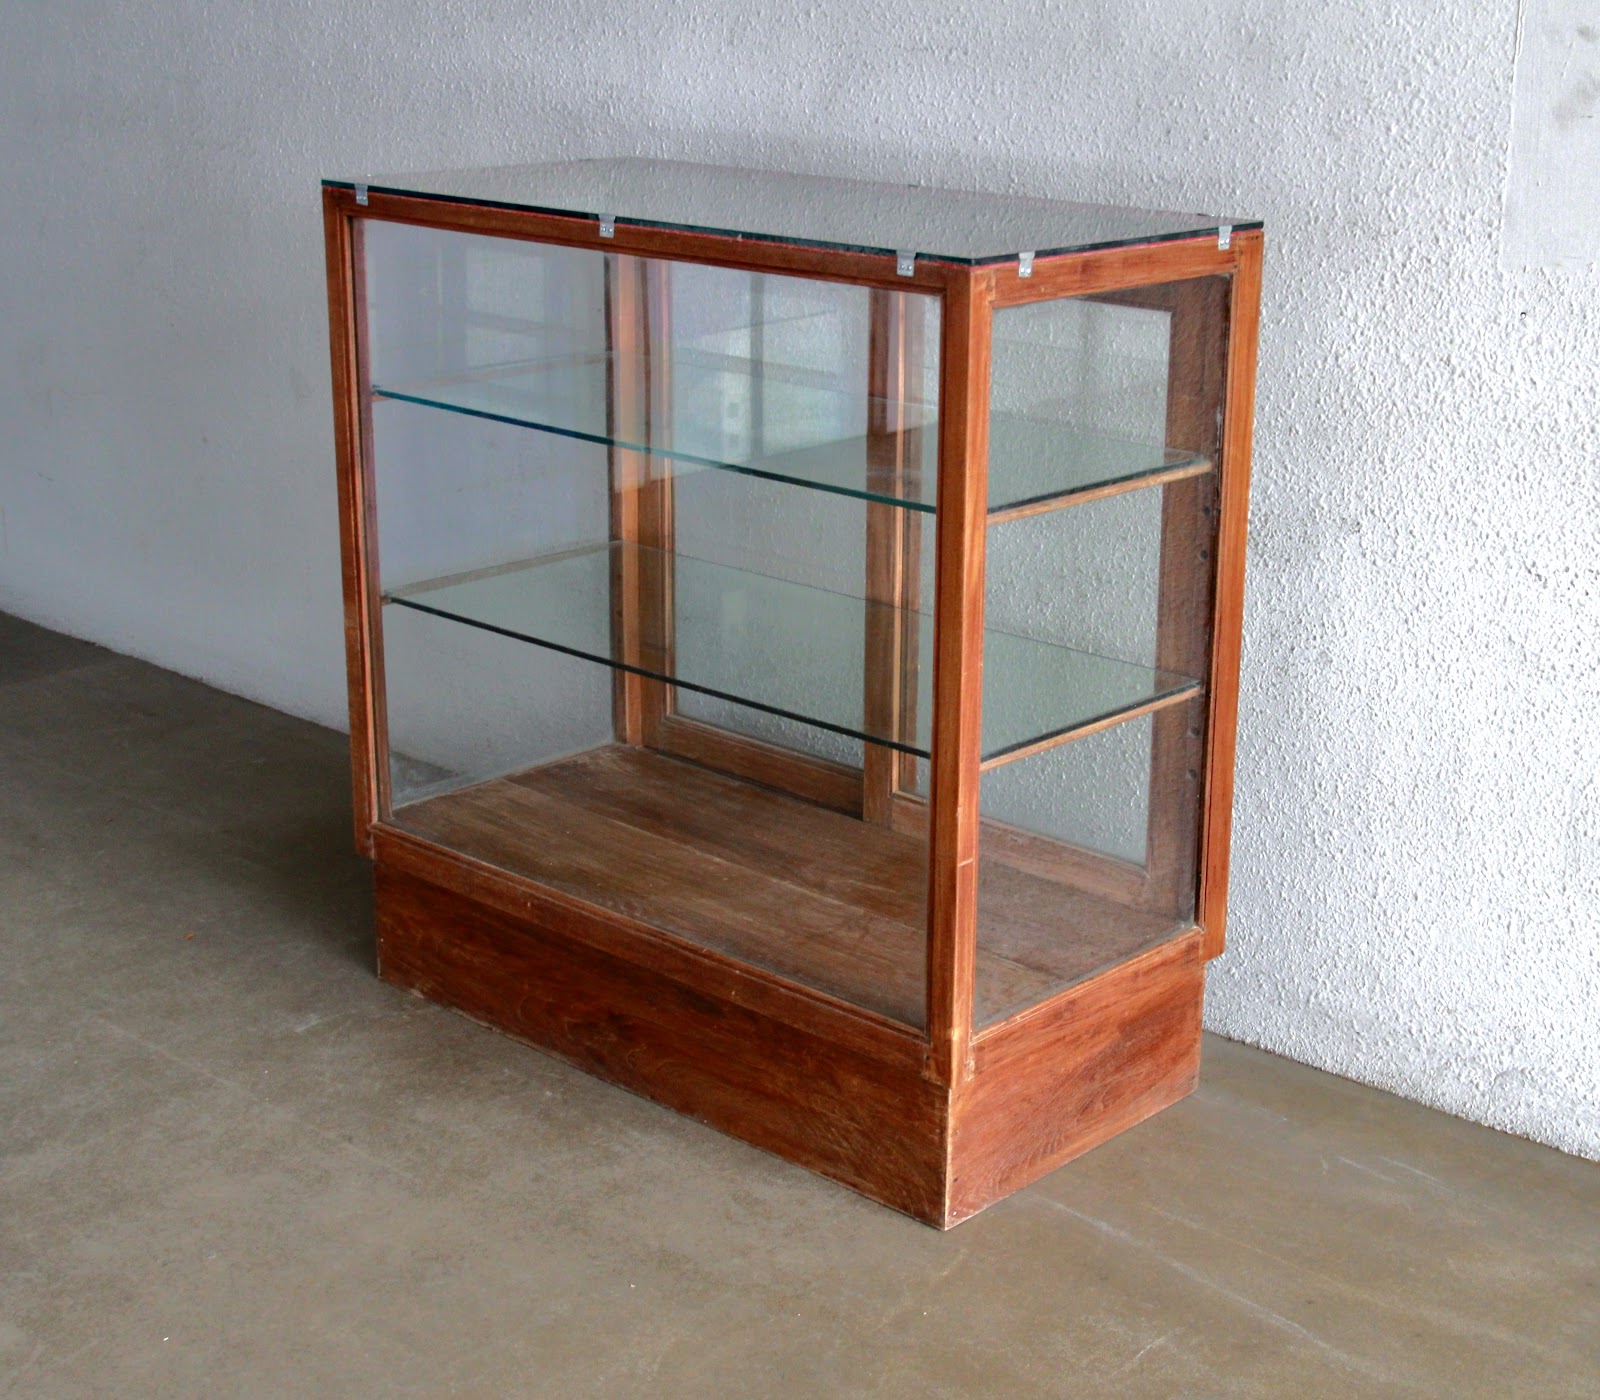 Chic Glass Display Cabinets For Showcasing Collectibles